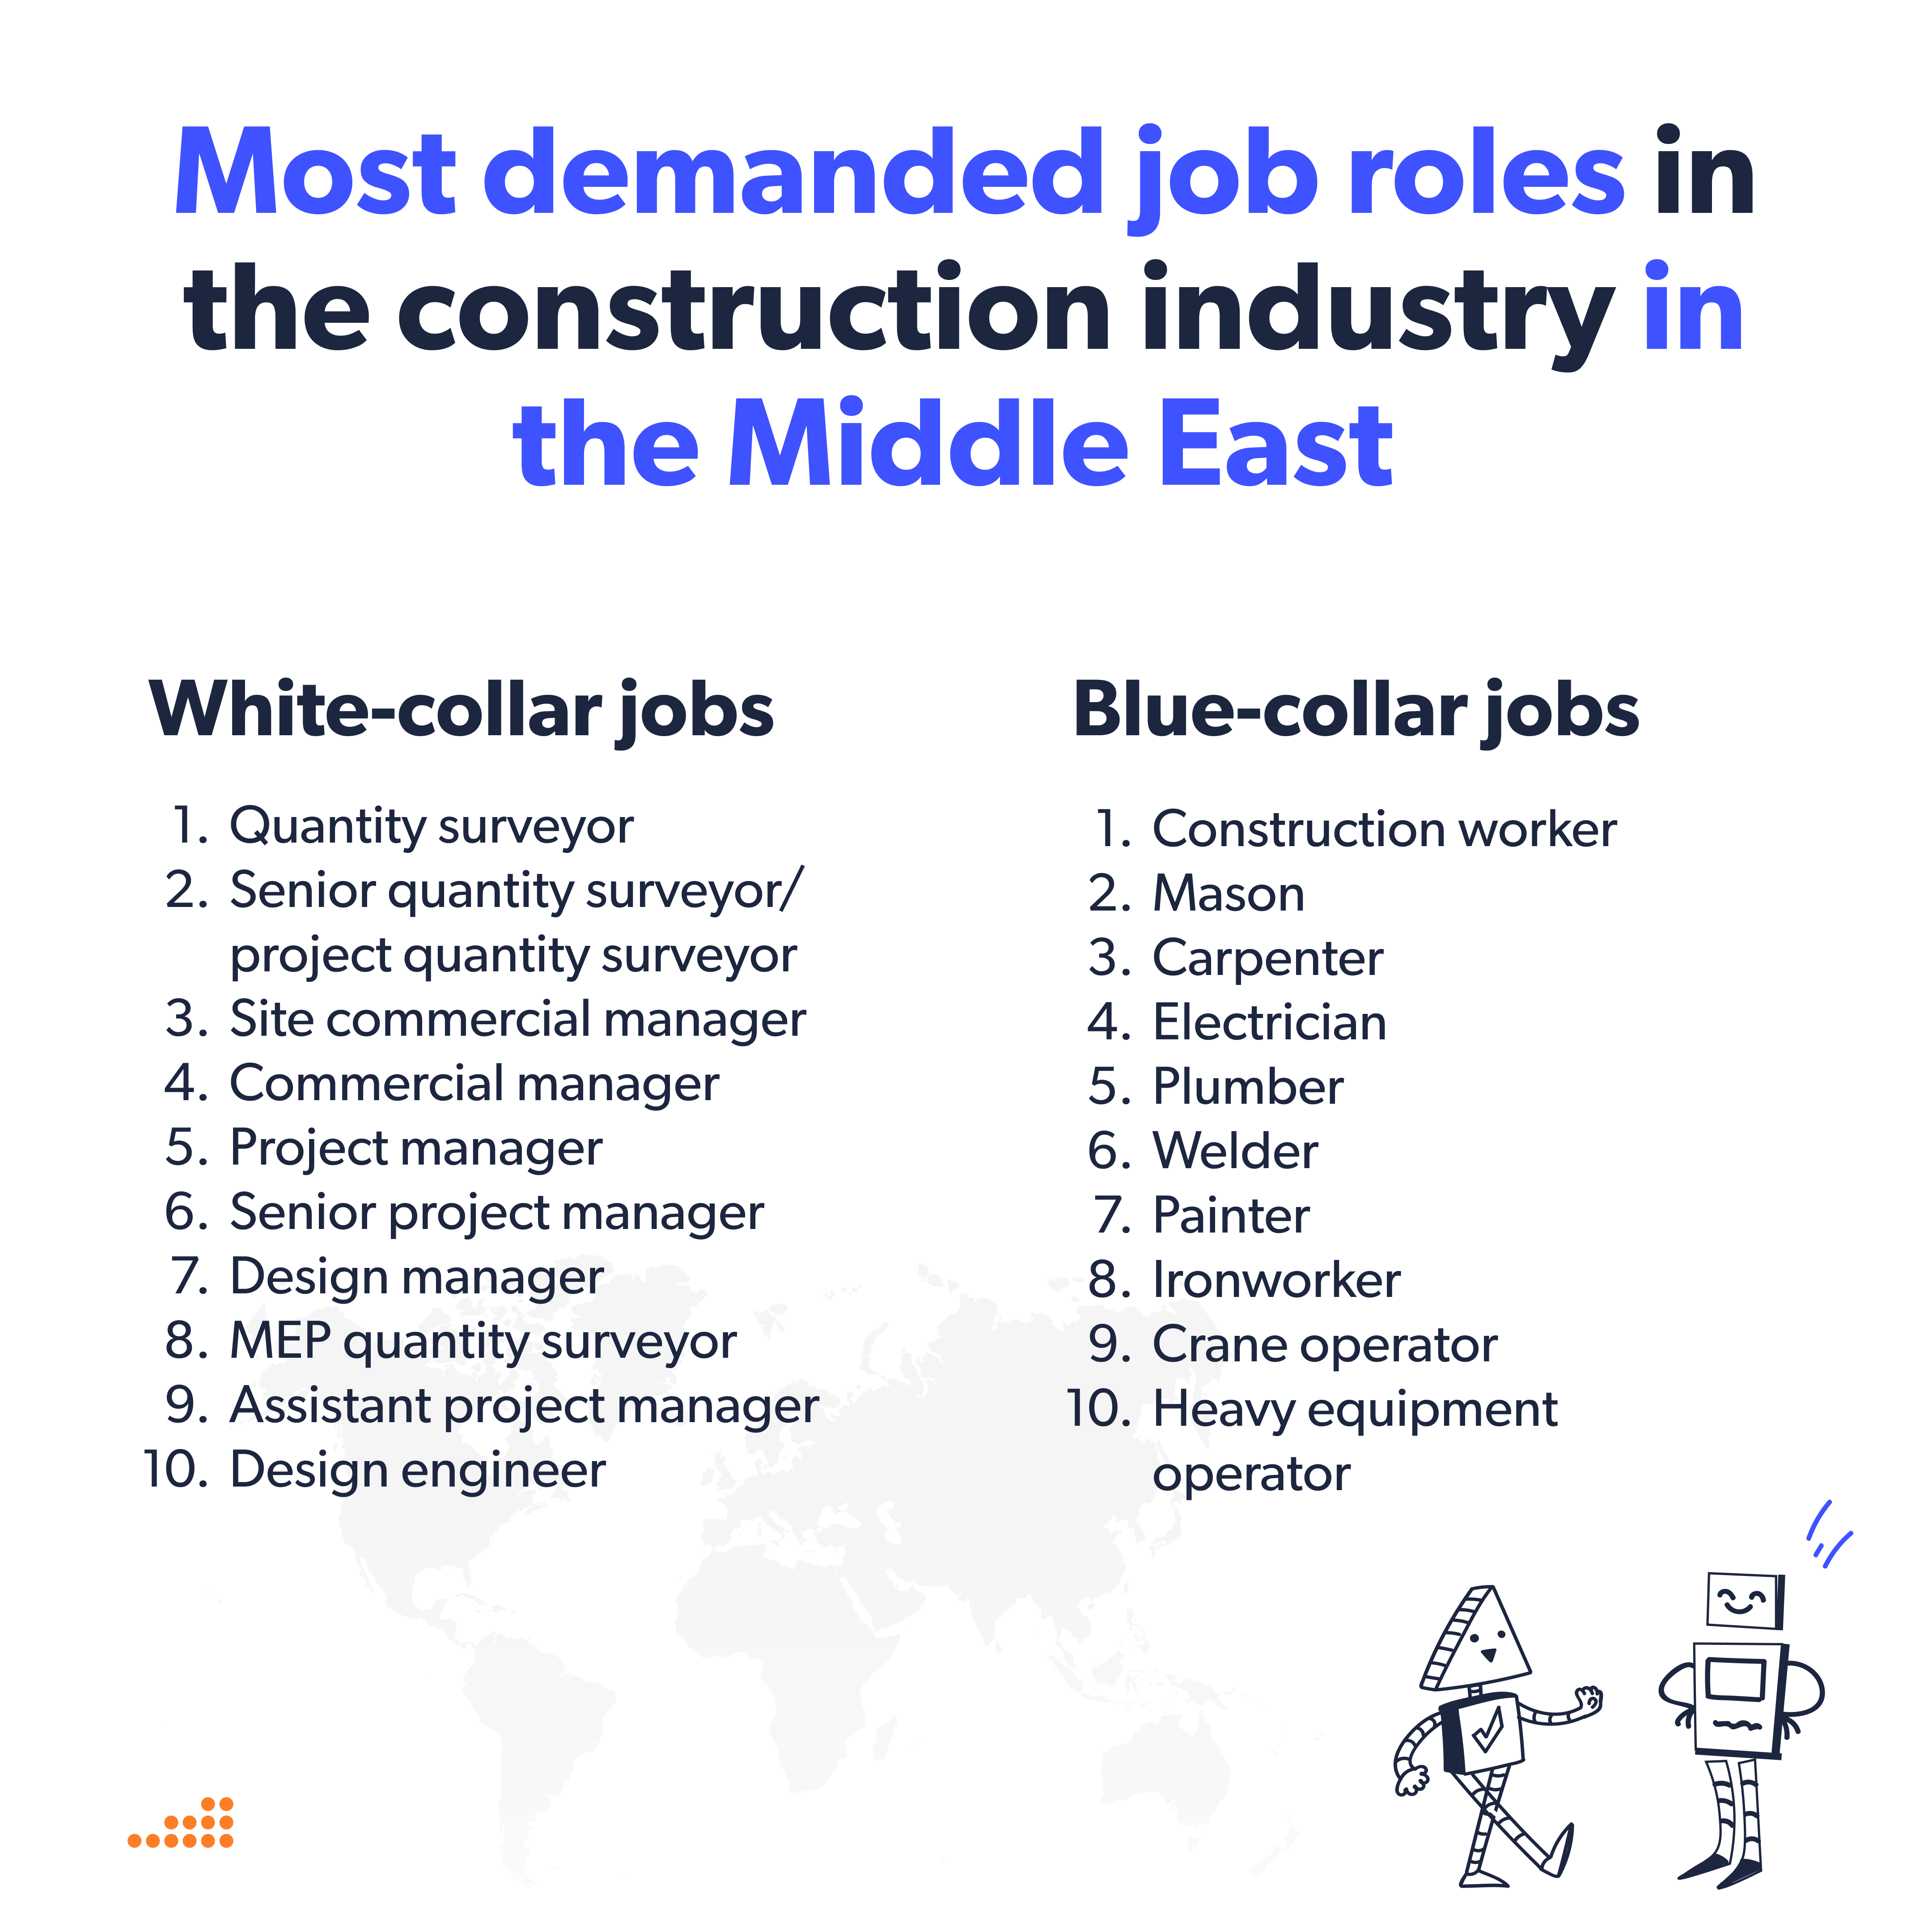 Most demanded job roles in the construction industry in the Middle East